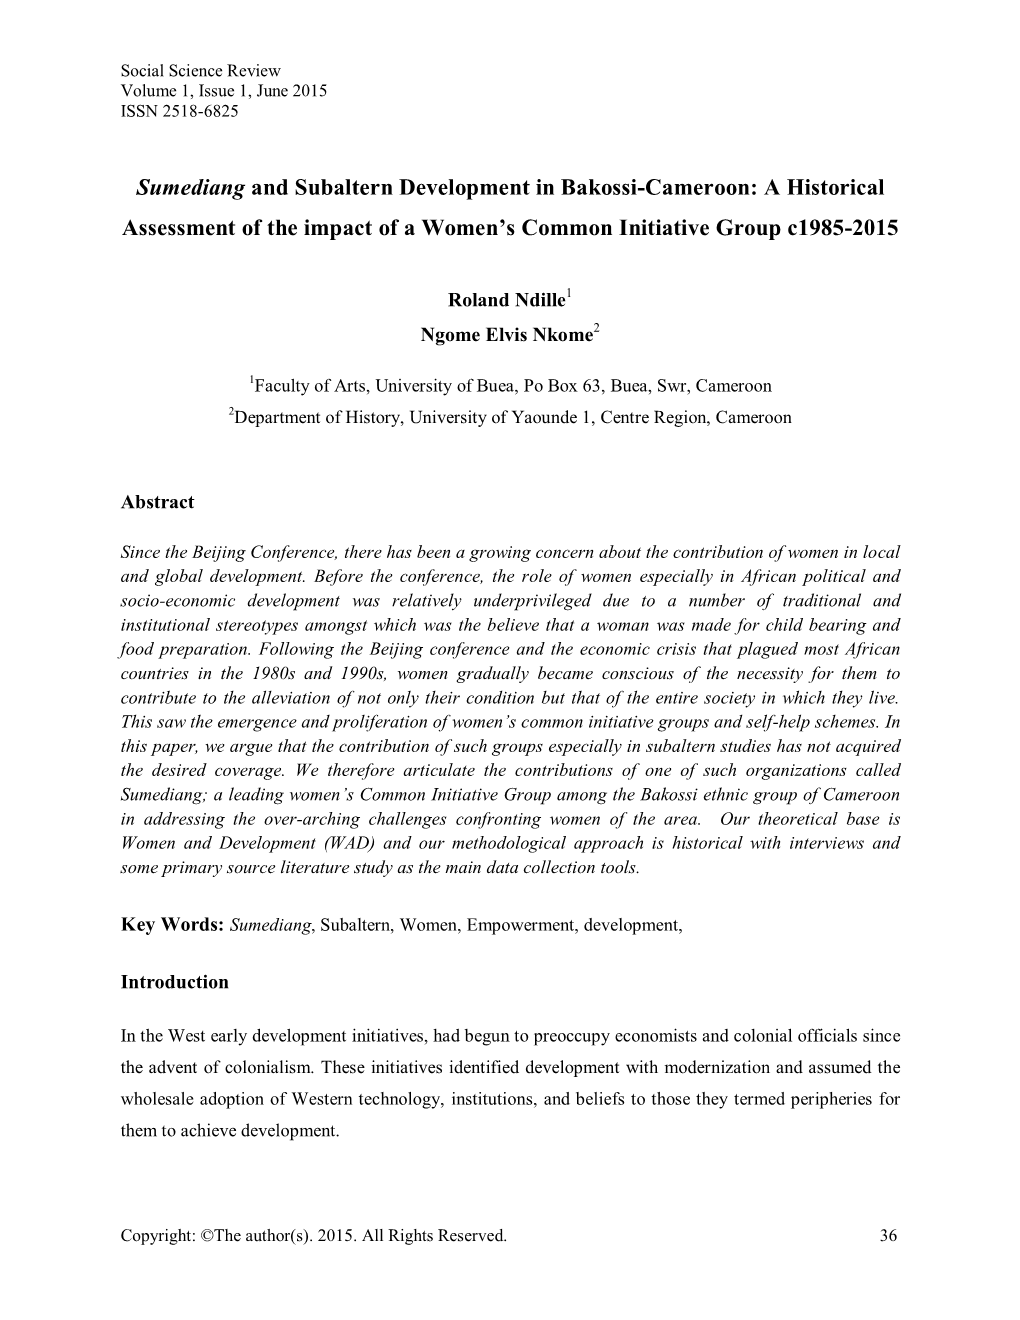 Sumediang and Subaltern Development in Bakossi-Cameroon: a Historical Assessment of the Impact of a Women’S Common Initiative Group C1985-2015